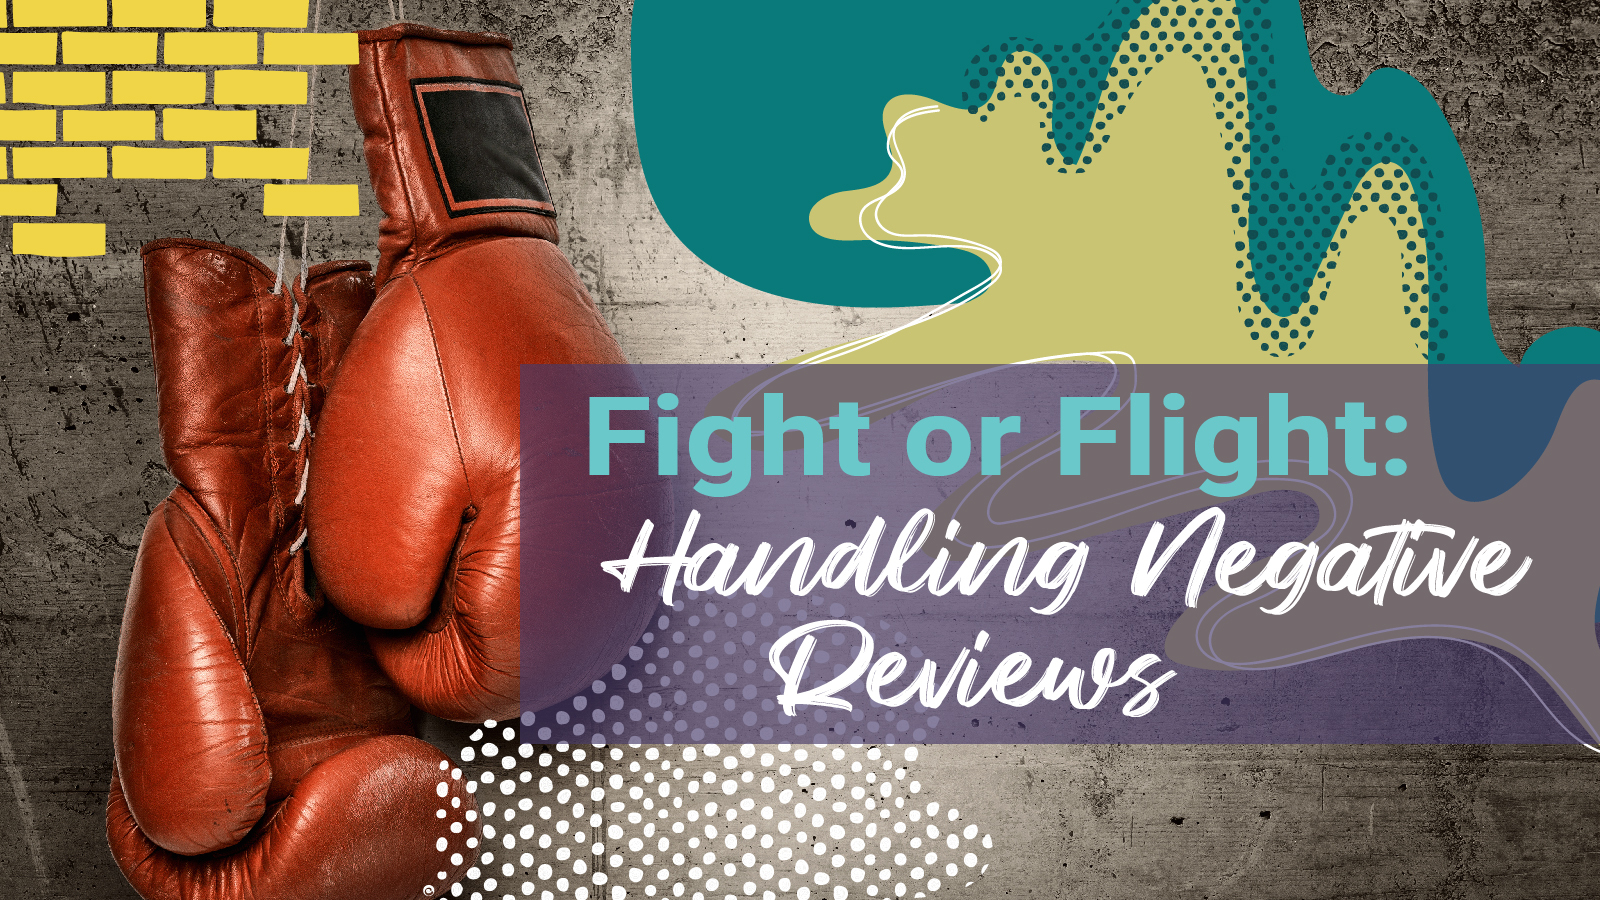 A pair of boxing gloves next to the words, "Fight or Flight: Handling Negative Reviews"